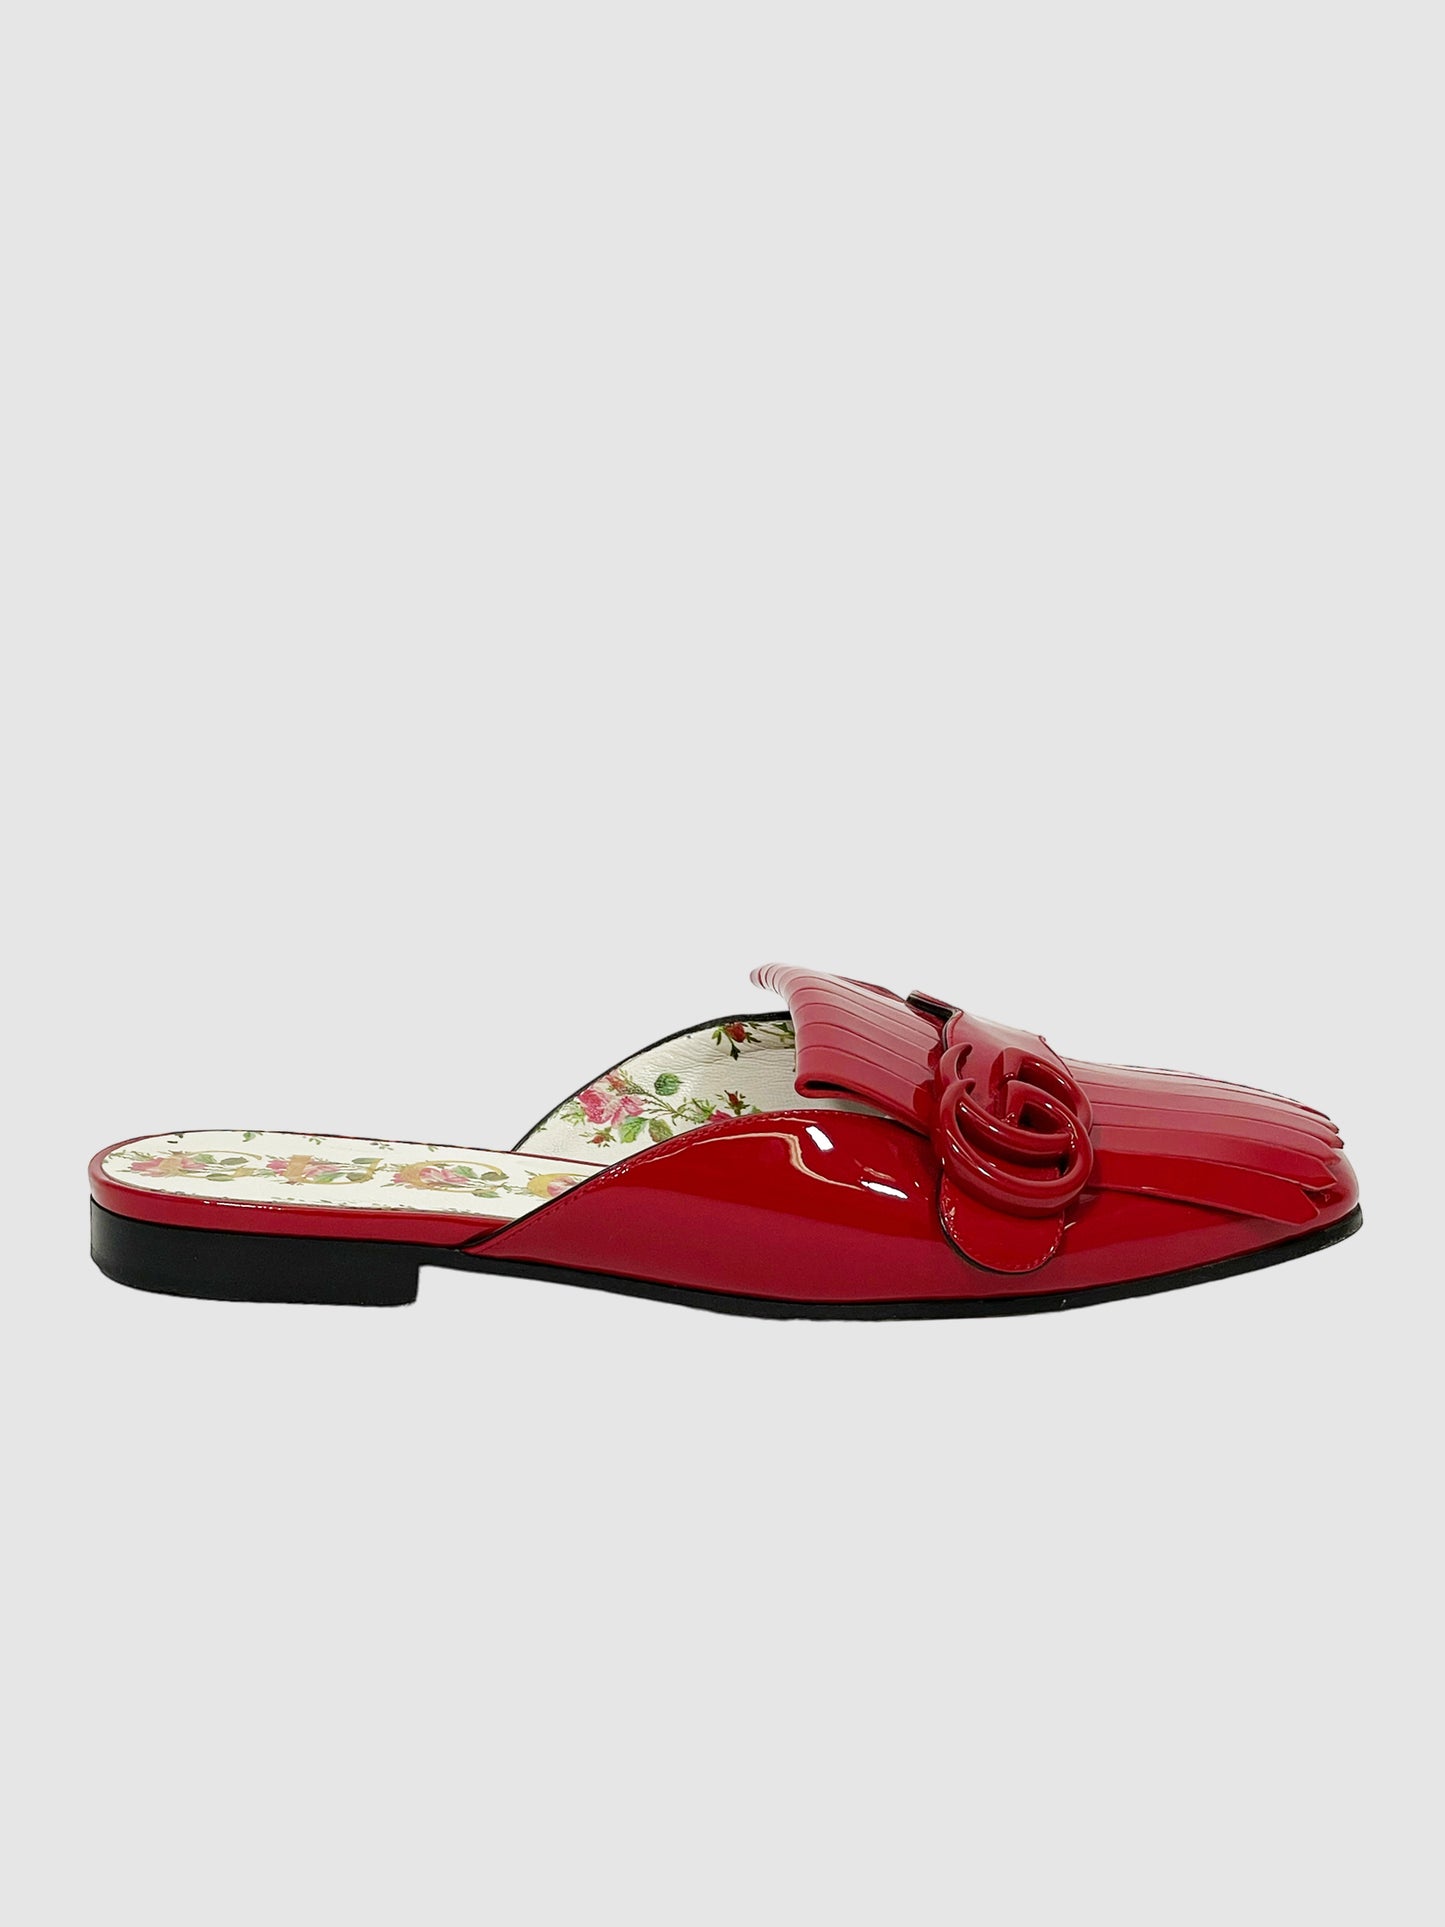 Gucci Double G Logo Patent Leather Mules - Size 36.5